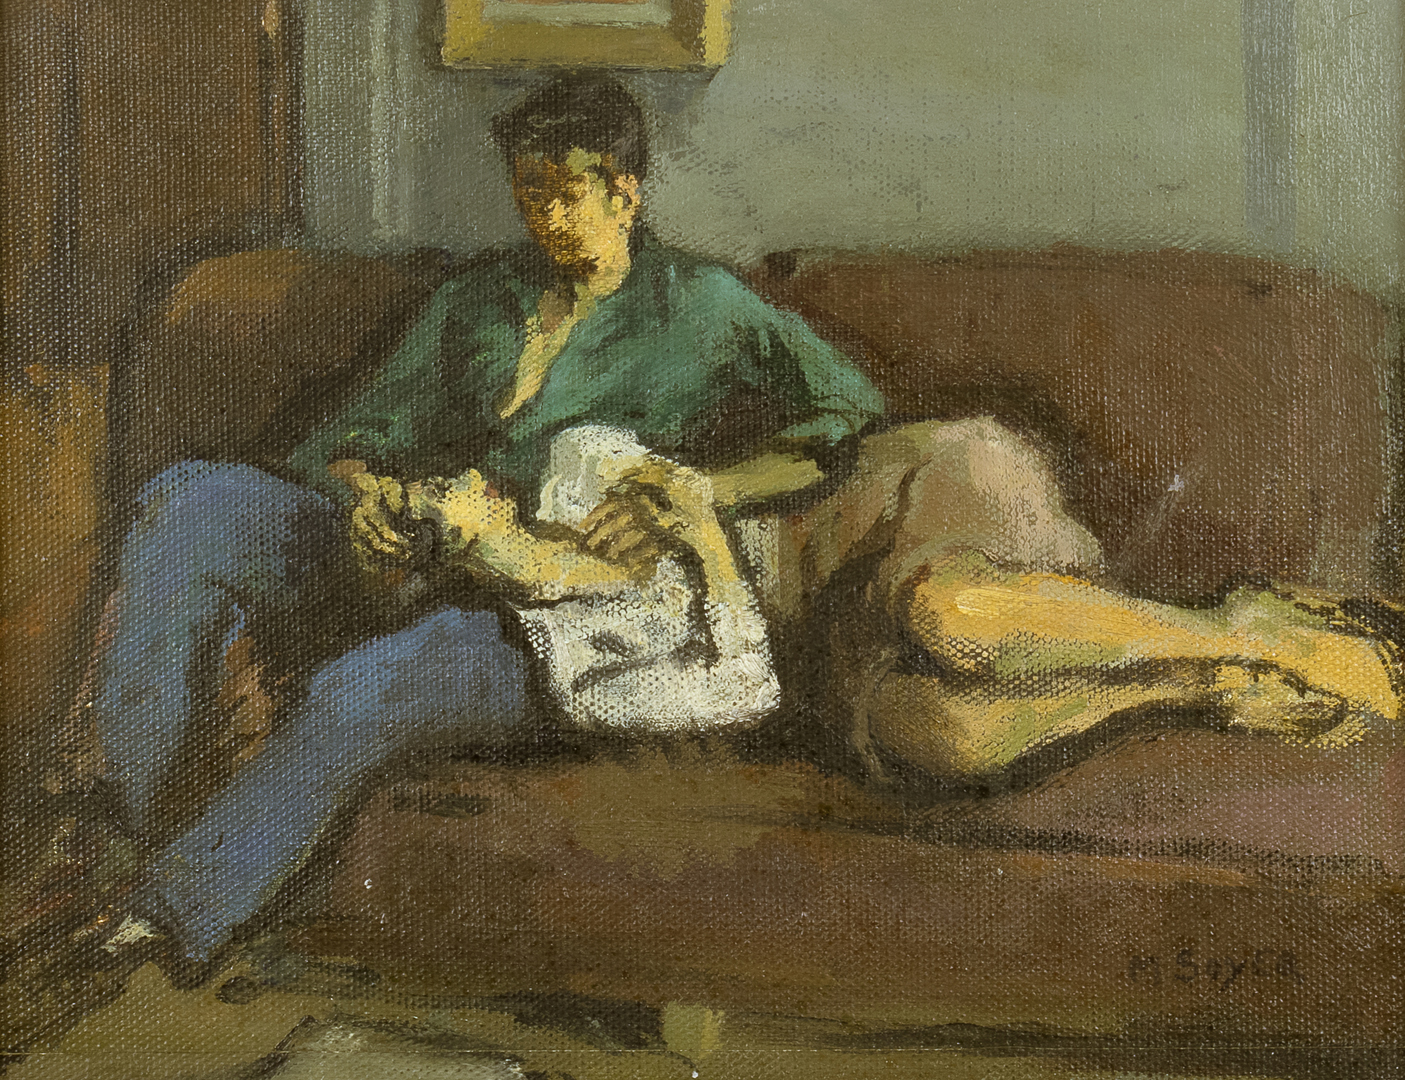 MOSES SOYER (1899-1974), UNTITLED